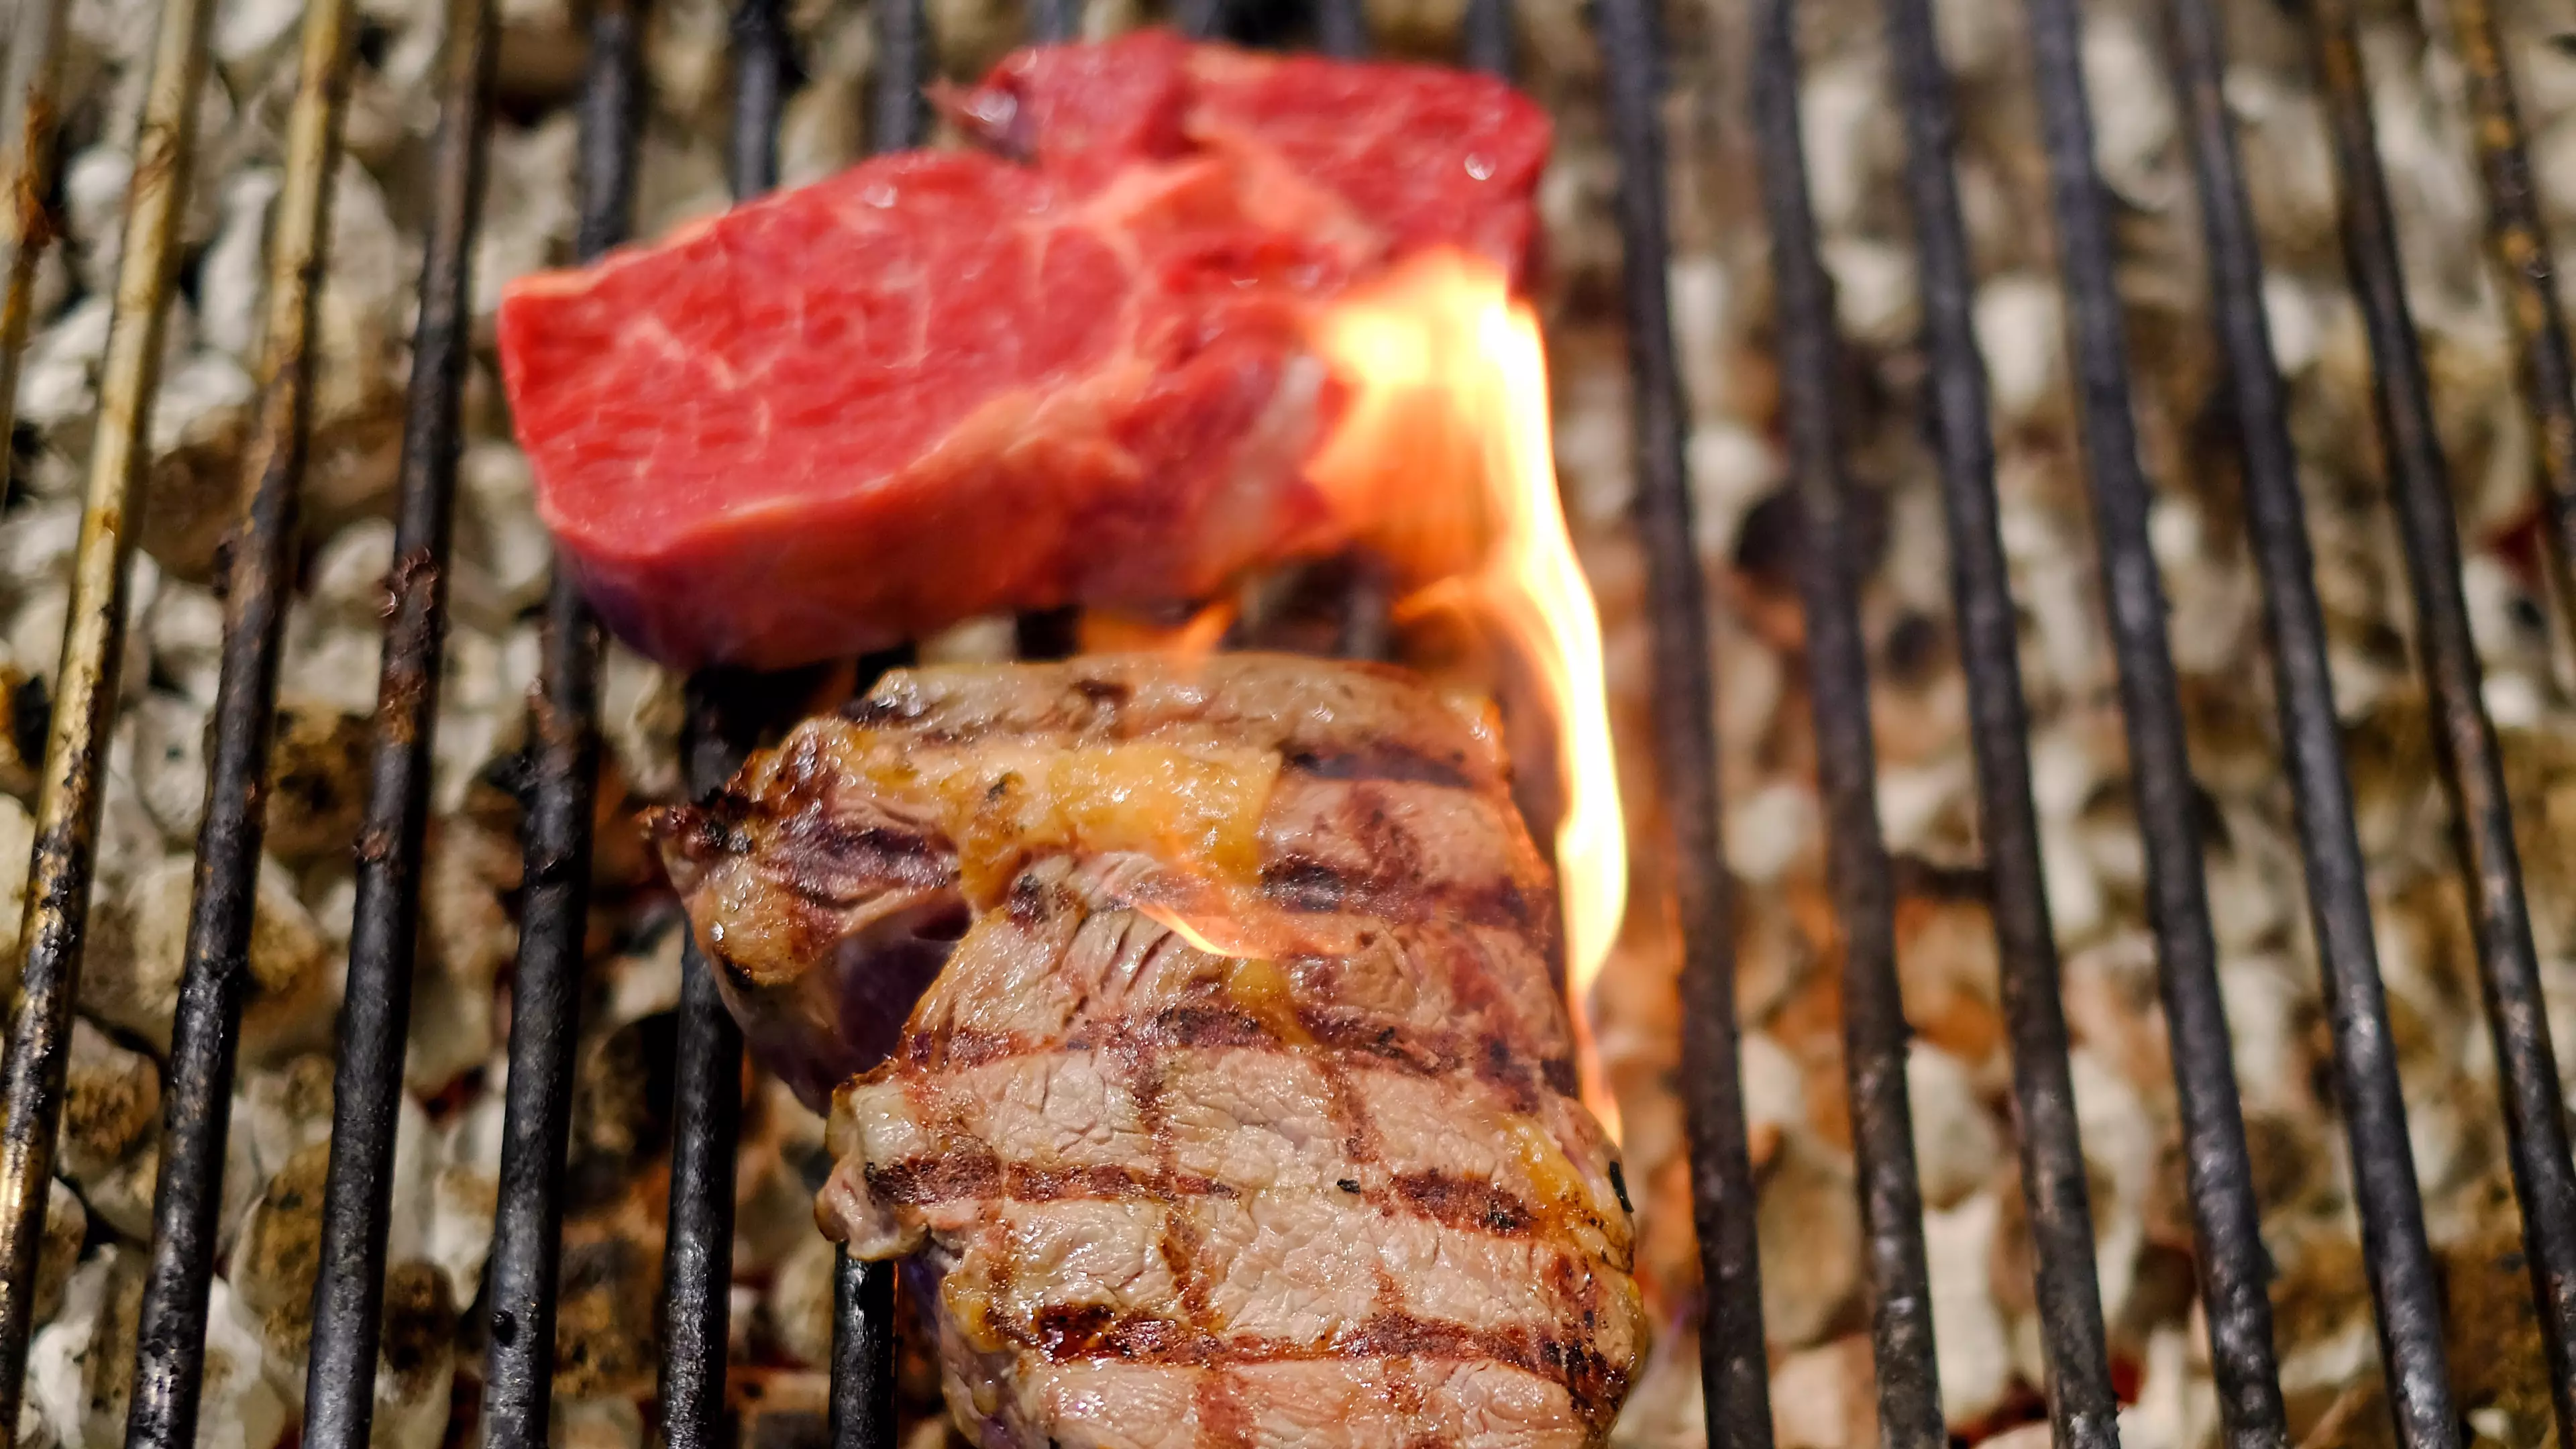 That Red Liquid Coming From Your Steak? It's Not Blood 